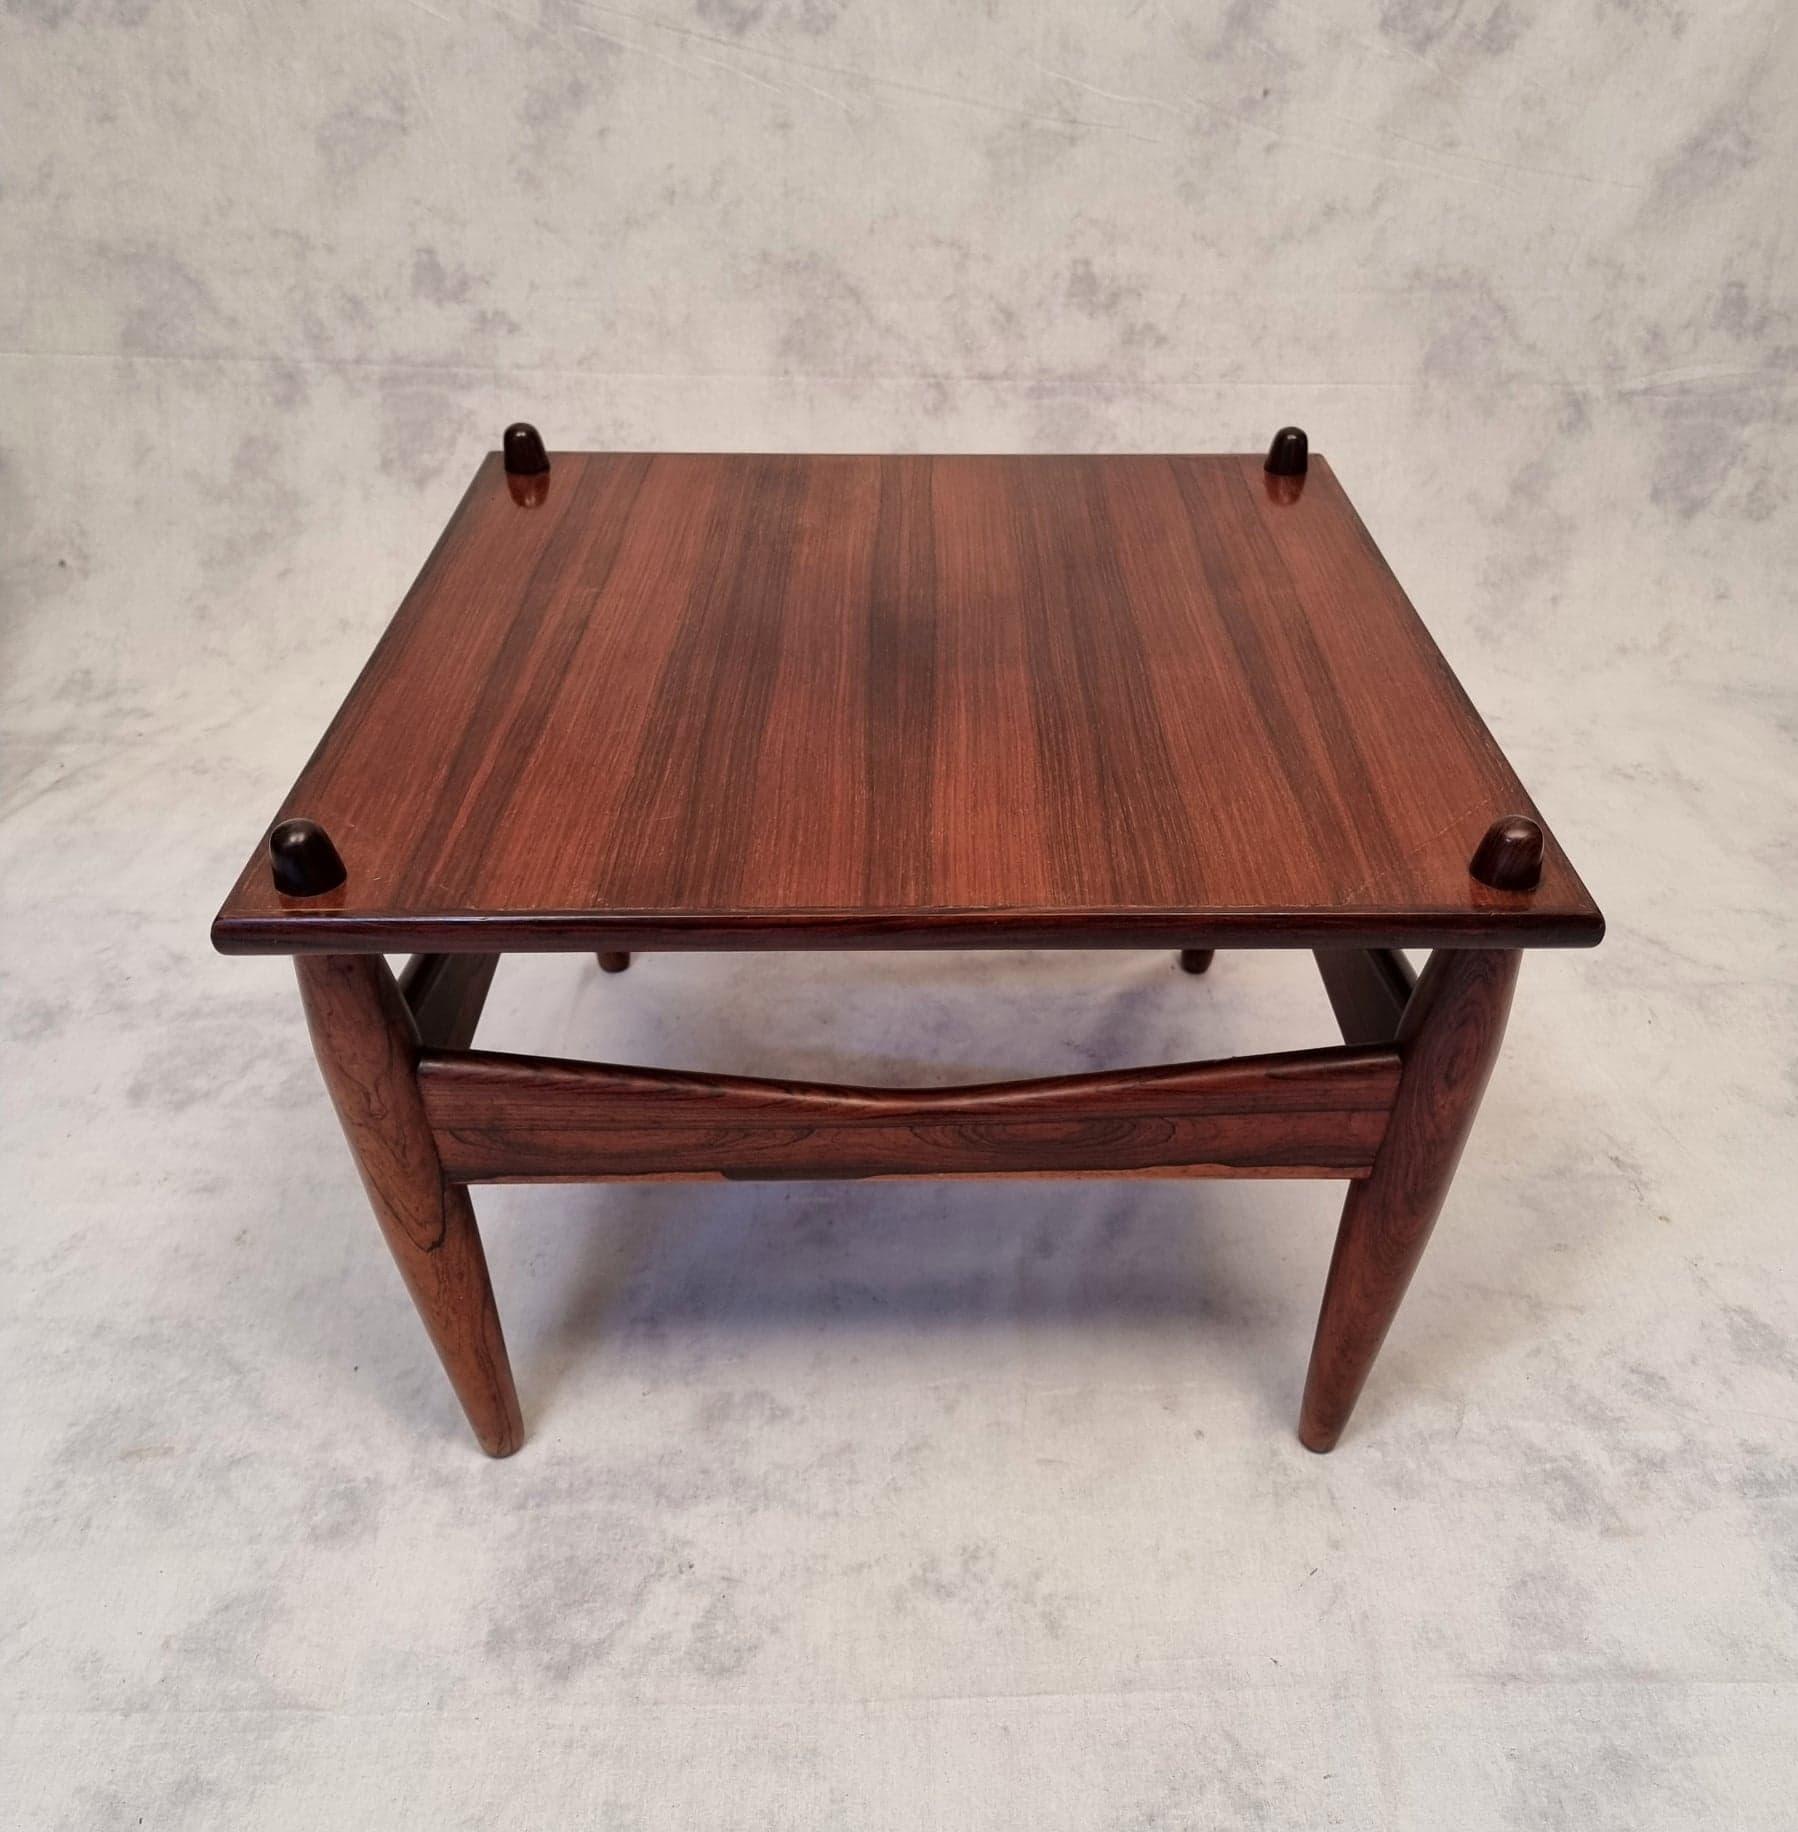 Pair Of Side Tables By Illum Wikkelsø – N°272, Rosewood, Ca 1950 For Sale 5